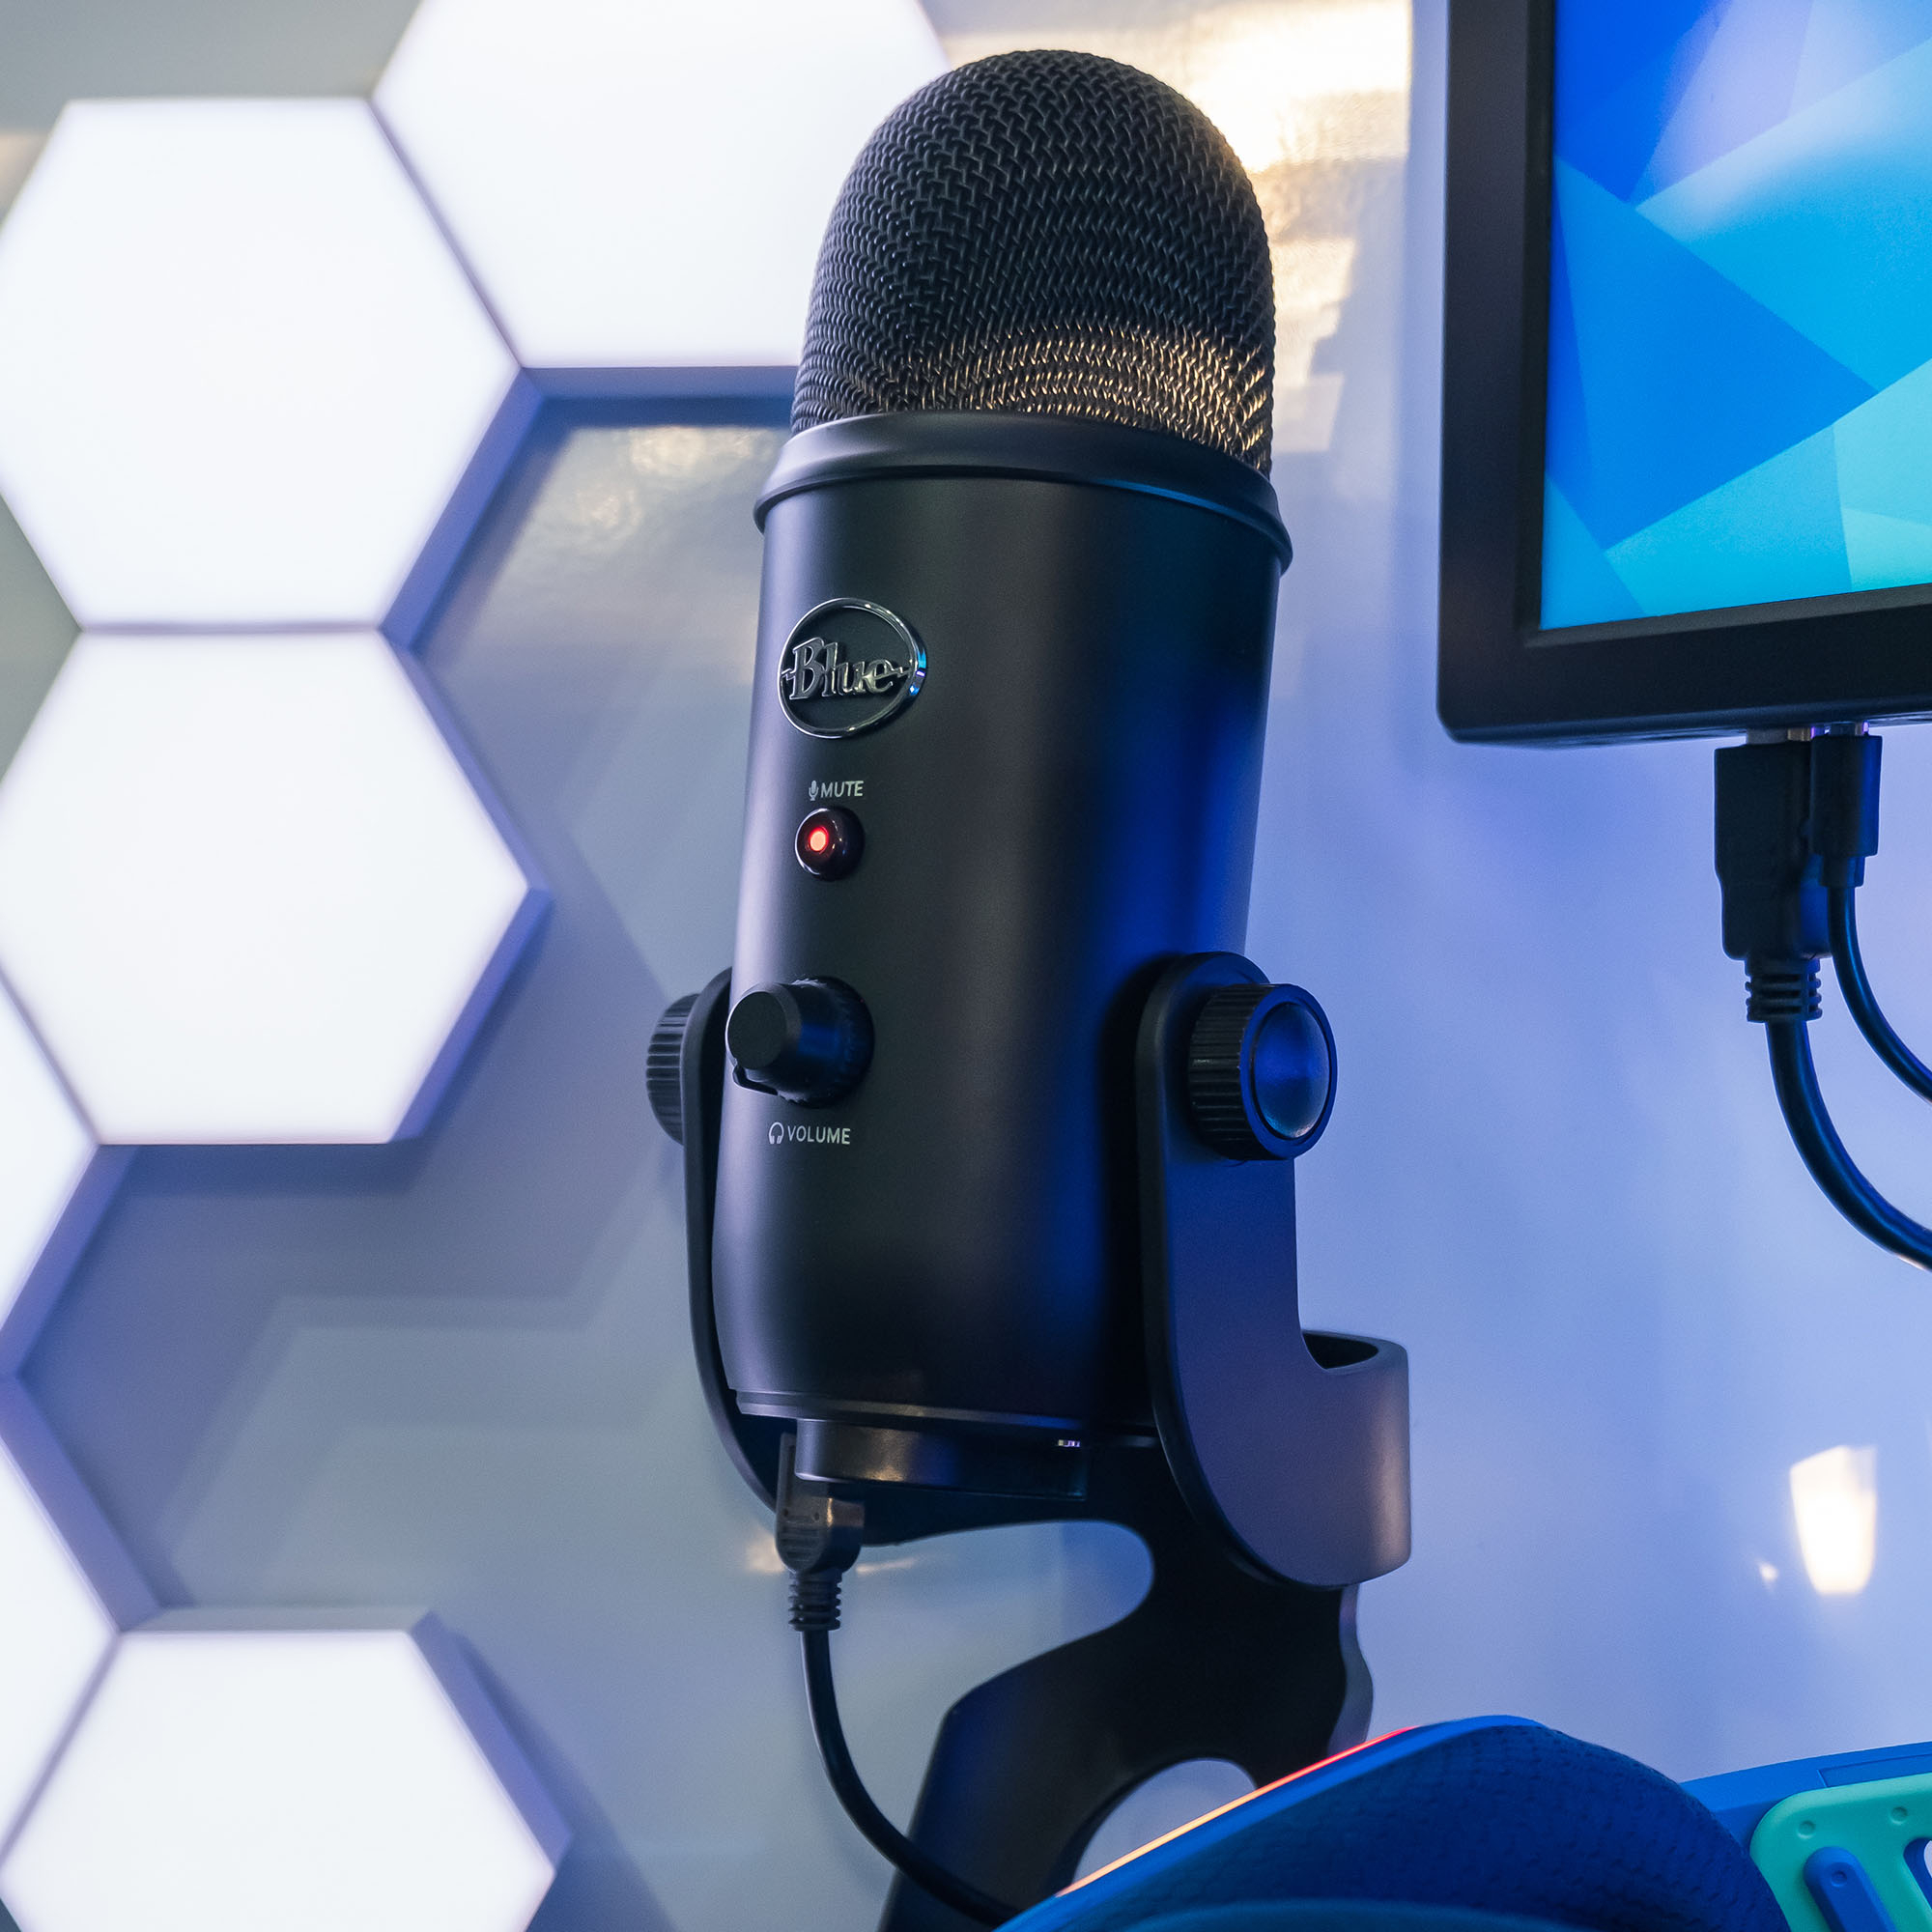 What Are the Best Accessories for the Blue Yeti Microphone?